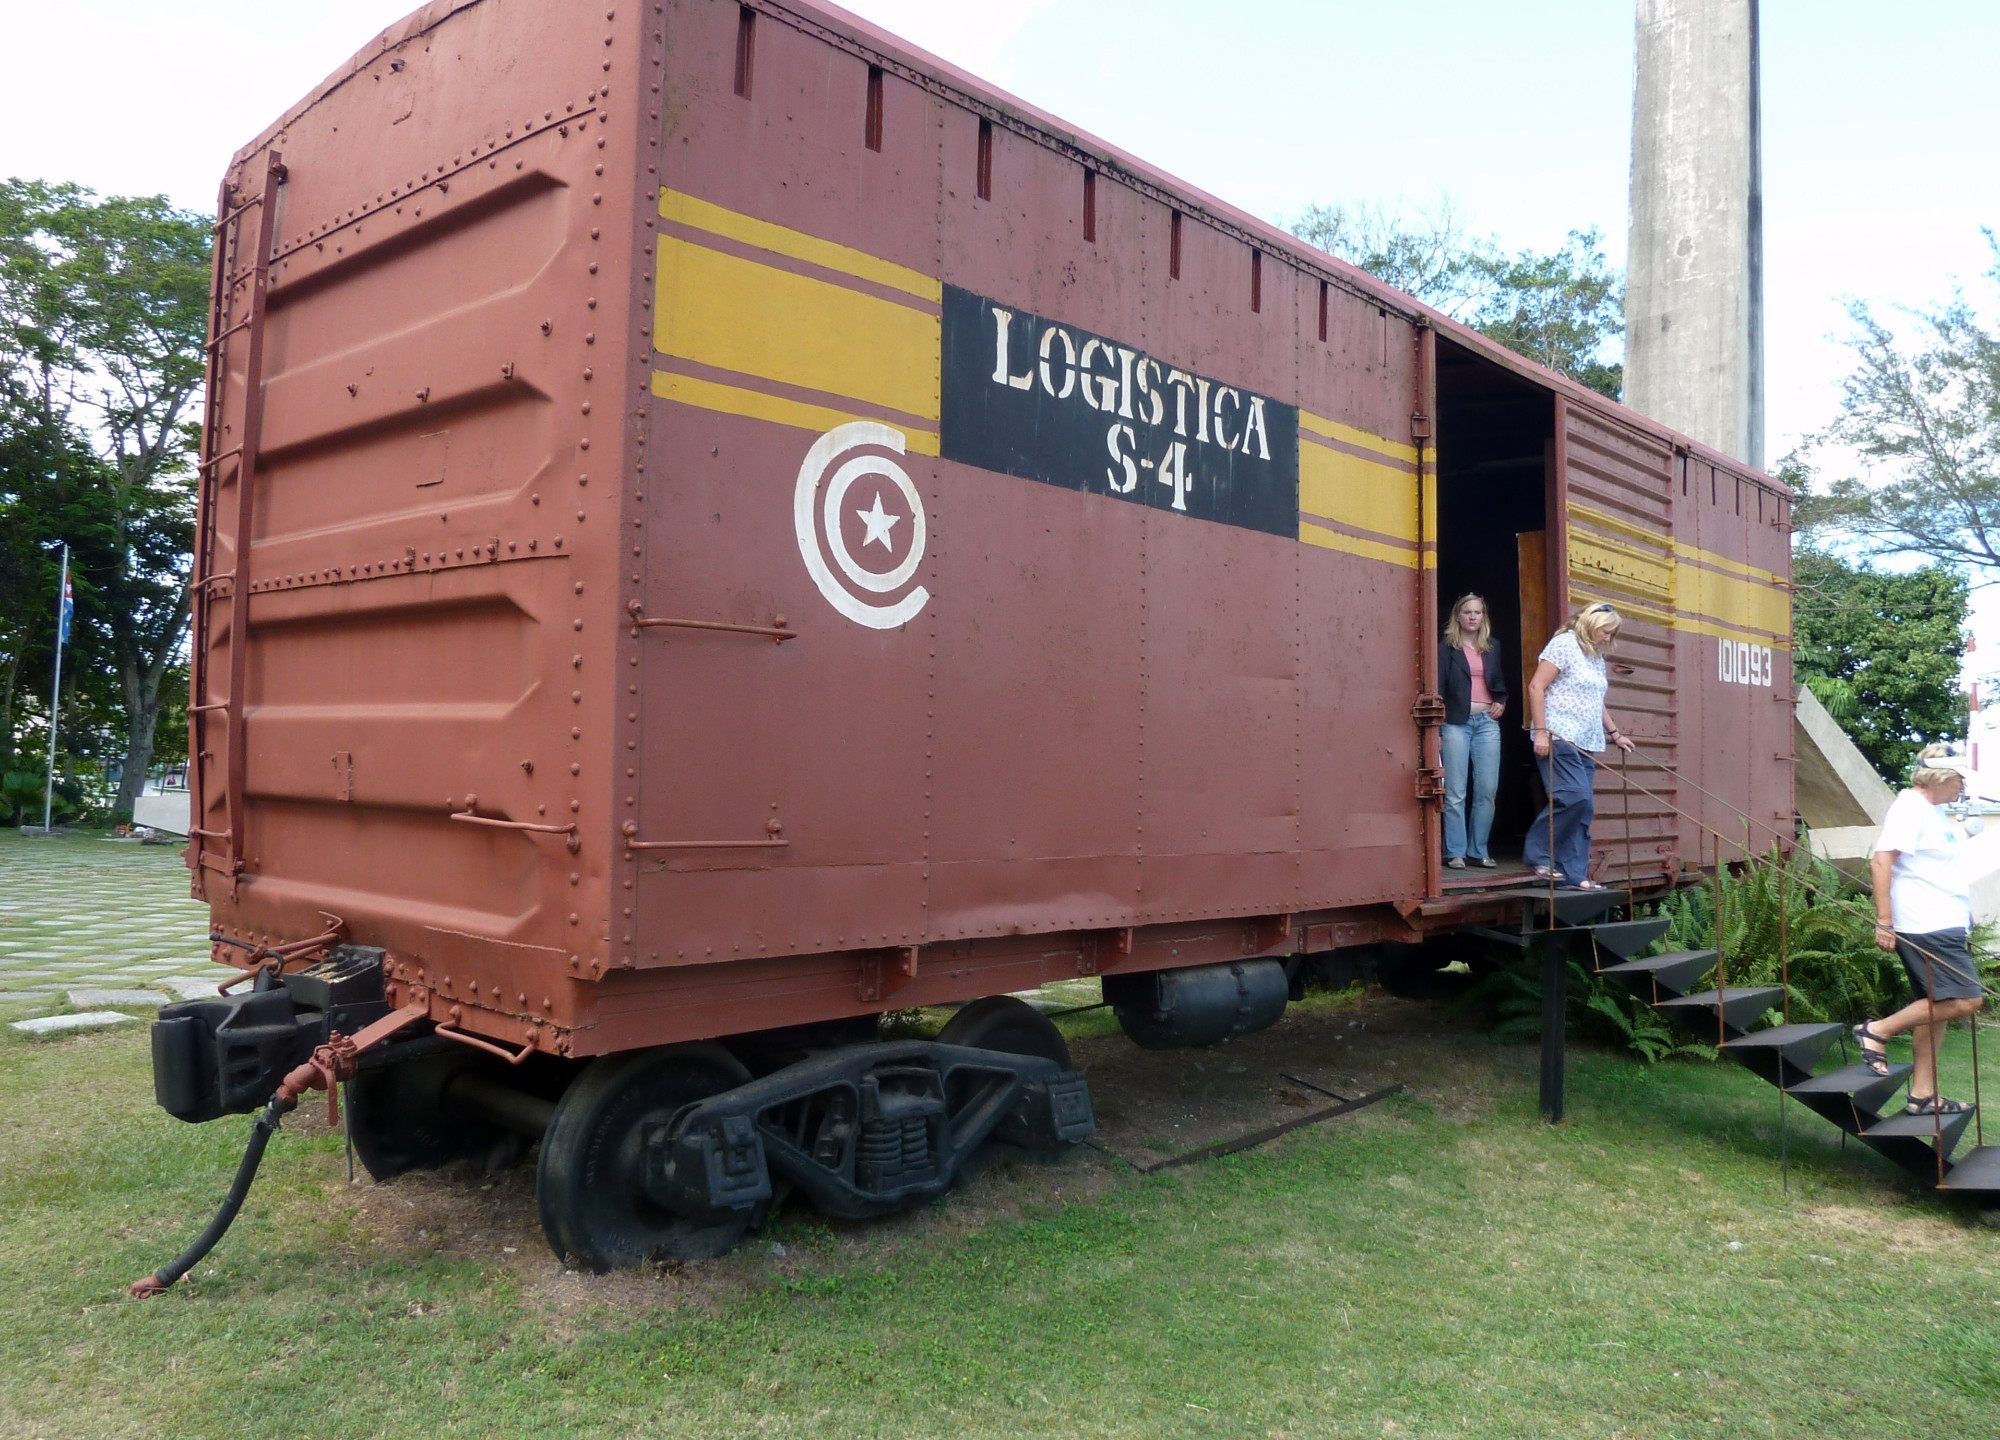 Taking of the Armored Train, Cuba